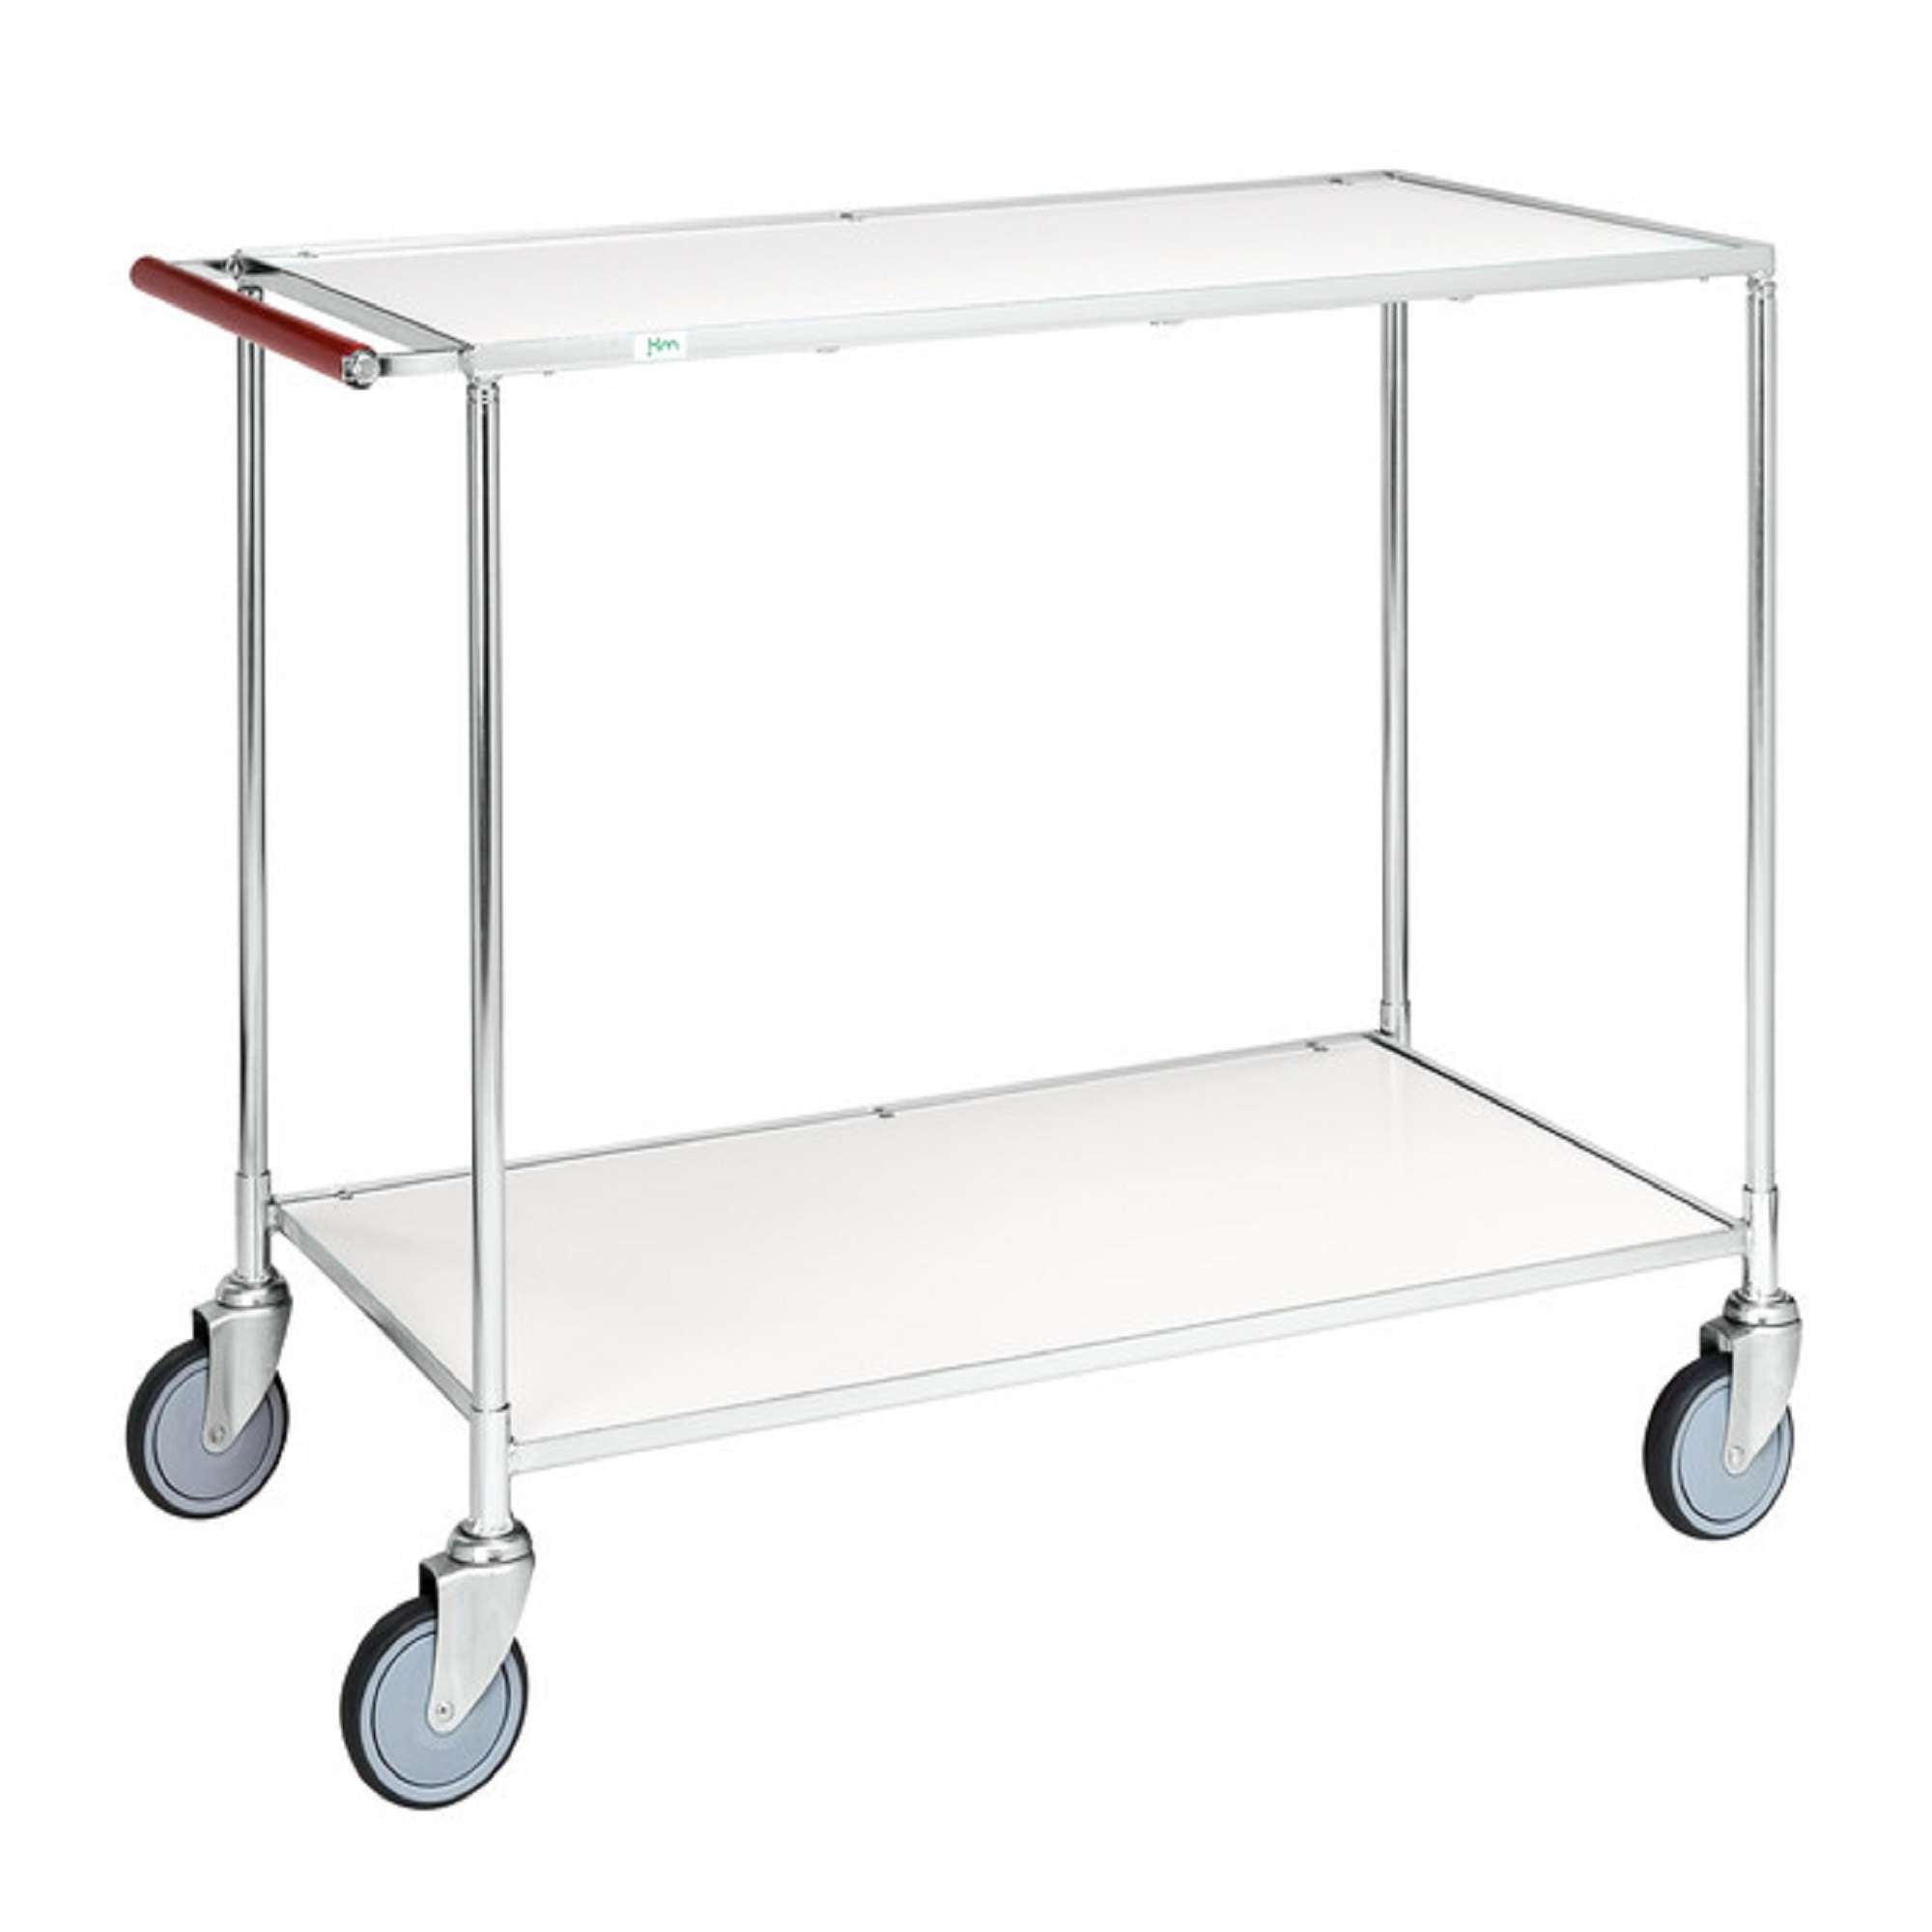 Smaller service Table trolley with 2 shelves LxWxH (mm) 1080x580x870